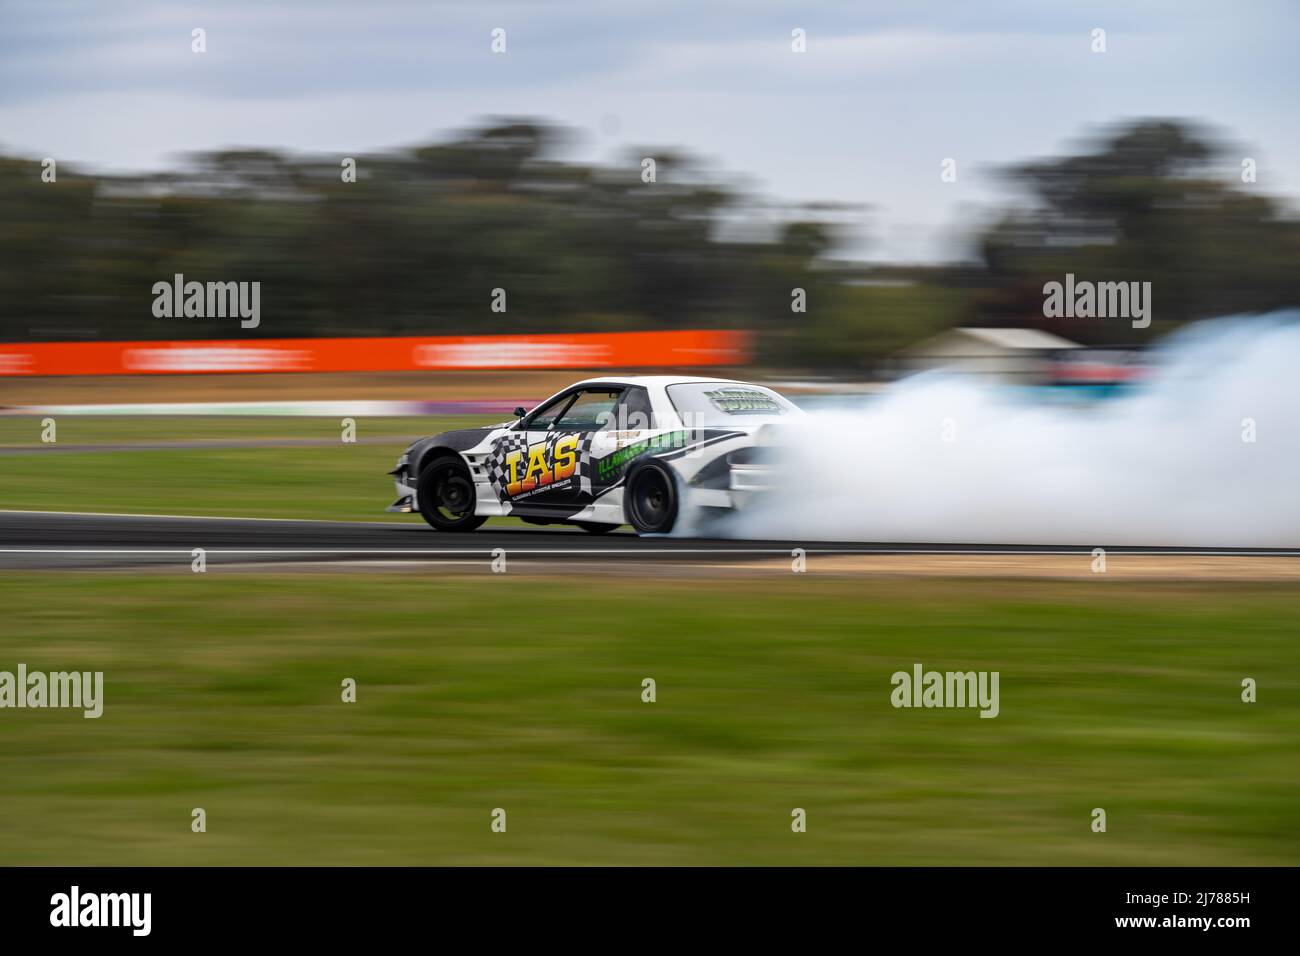 Benalla, Victoria, Australia. 7th May 2022. The IAS car drifting mid-transition in the Motorsport News Esses at Winton Motor Raceway Credit: James Forrester/Alamy Live News Stock Photo